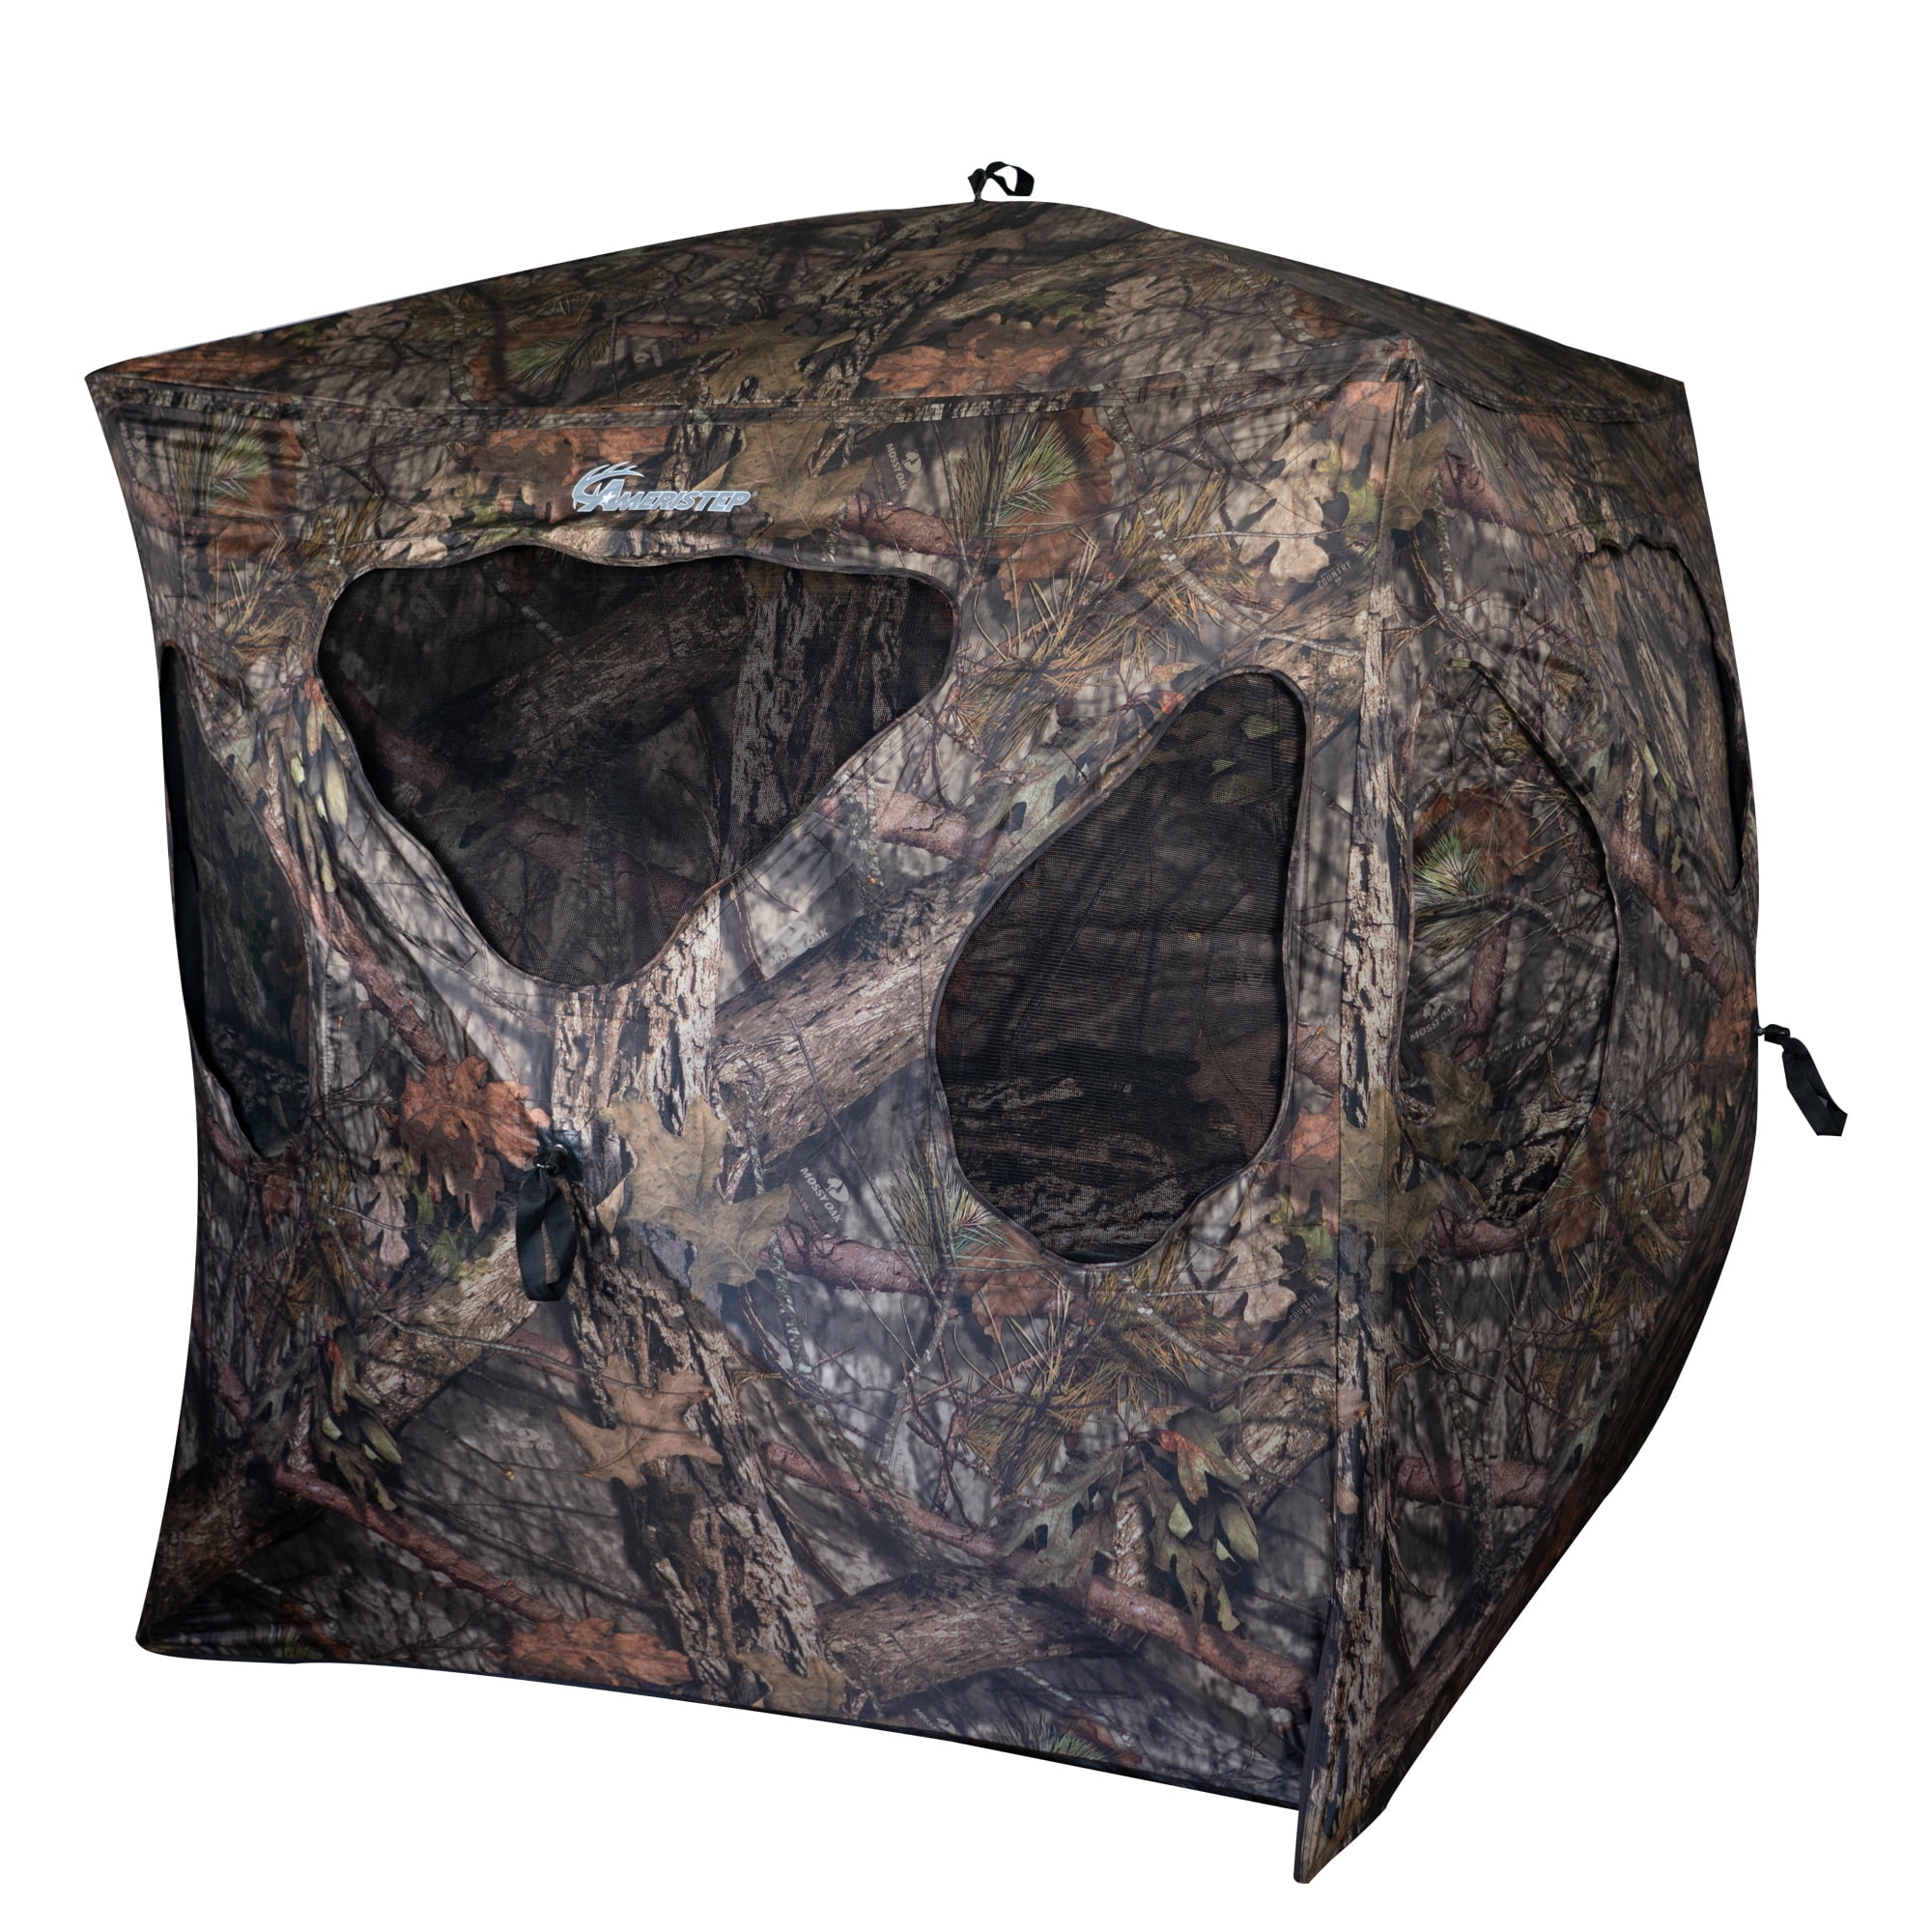 Camouflage Plano AMEBL3029 Ameristep Outdoor 3 Person Brickhouse Hunting Blind 